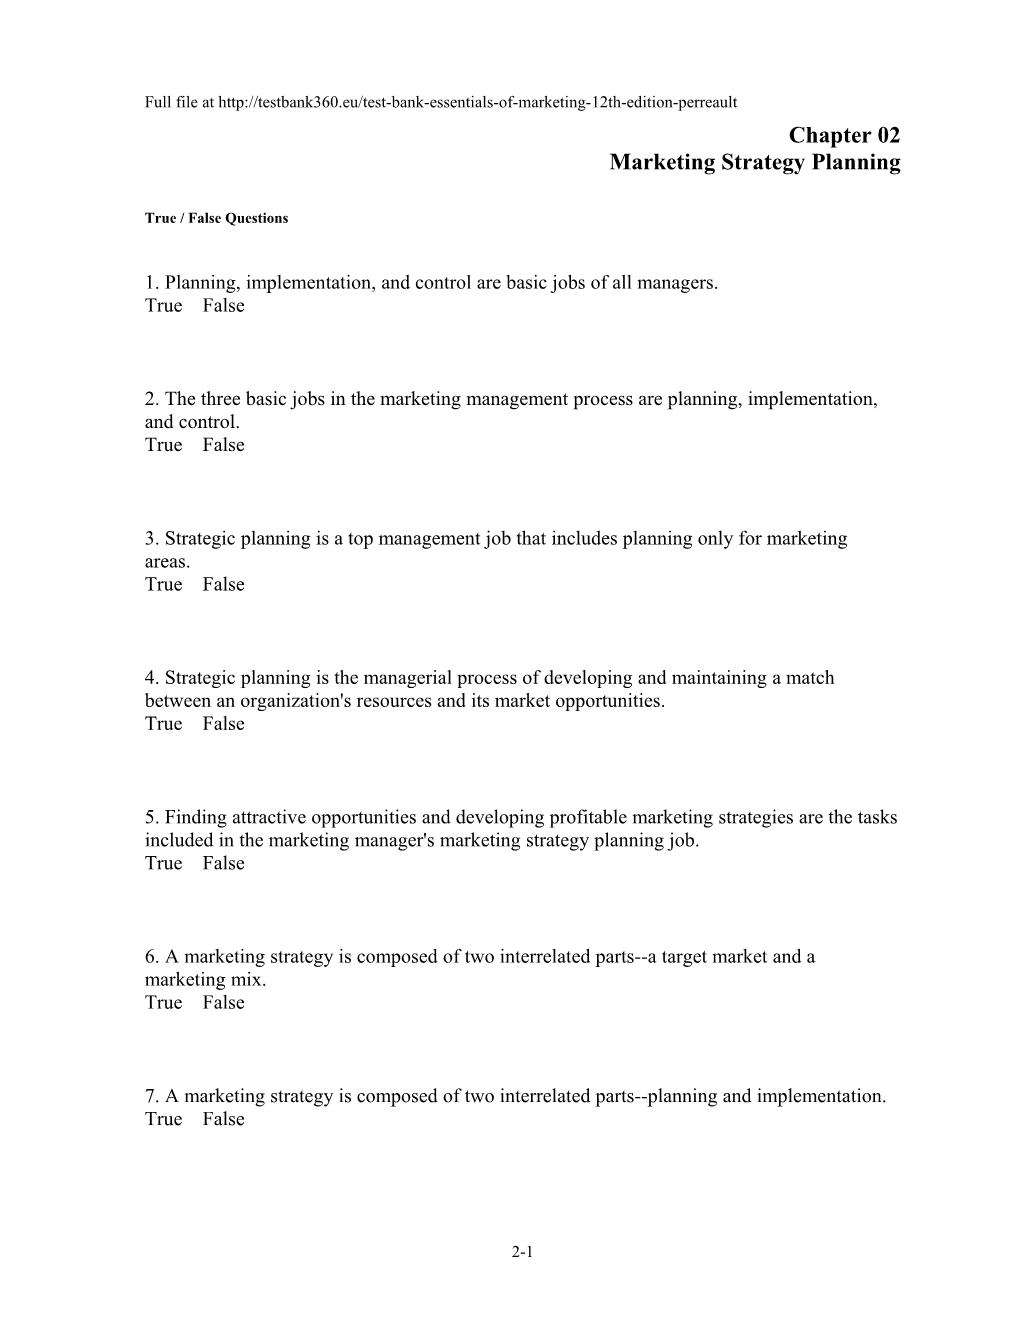 Chapter 02 Marketing Strategy Planning